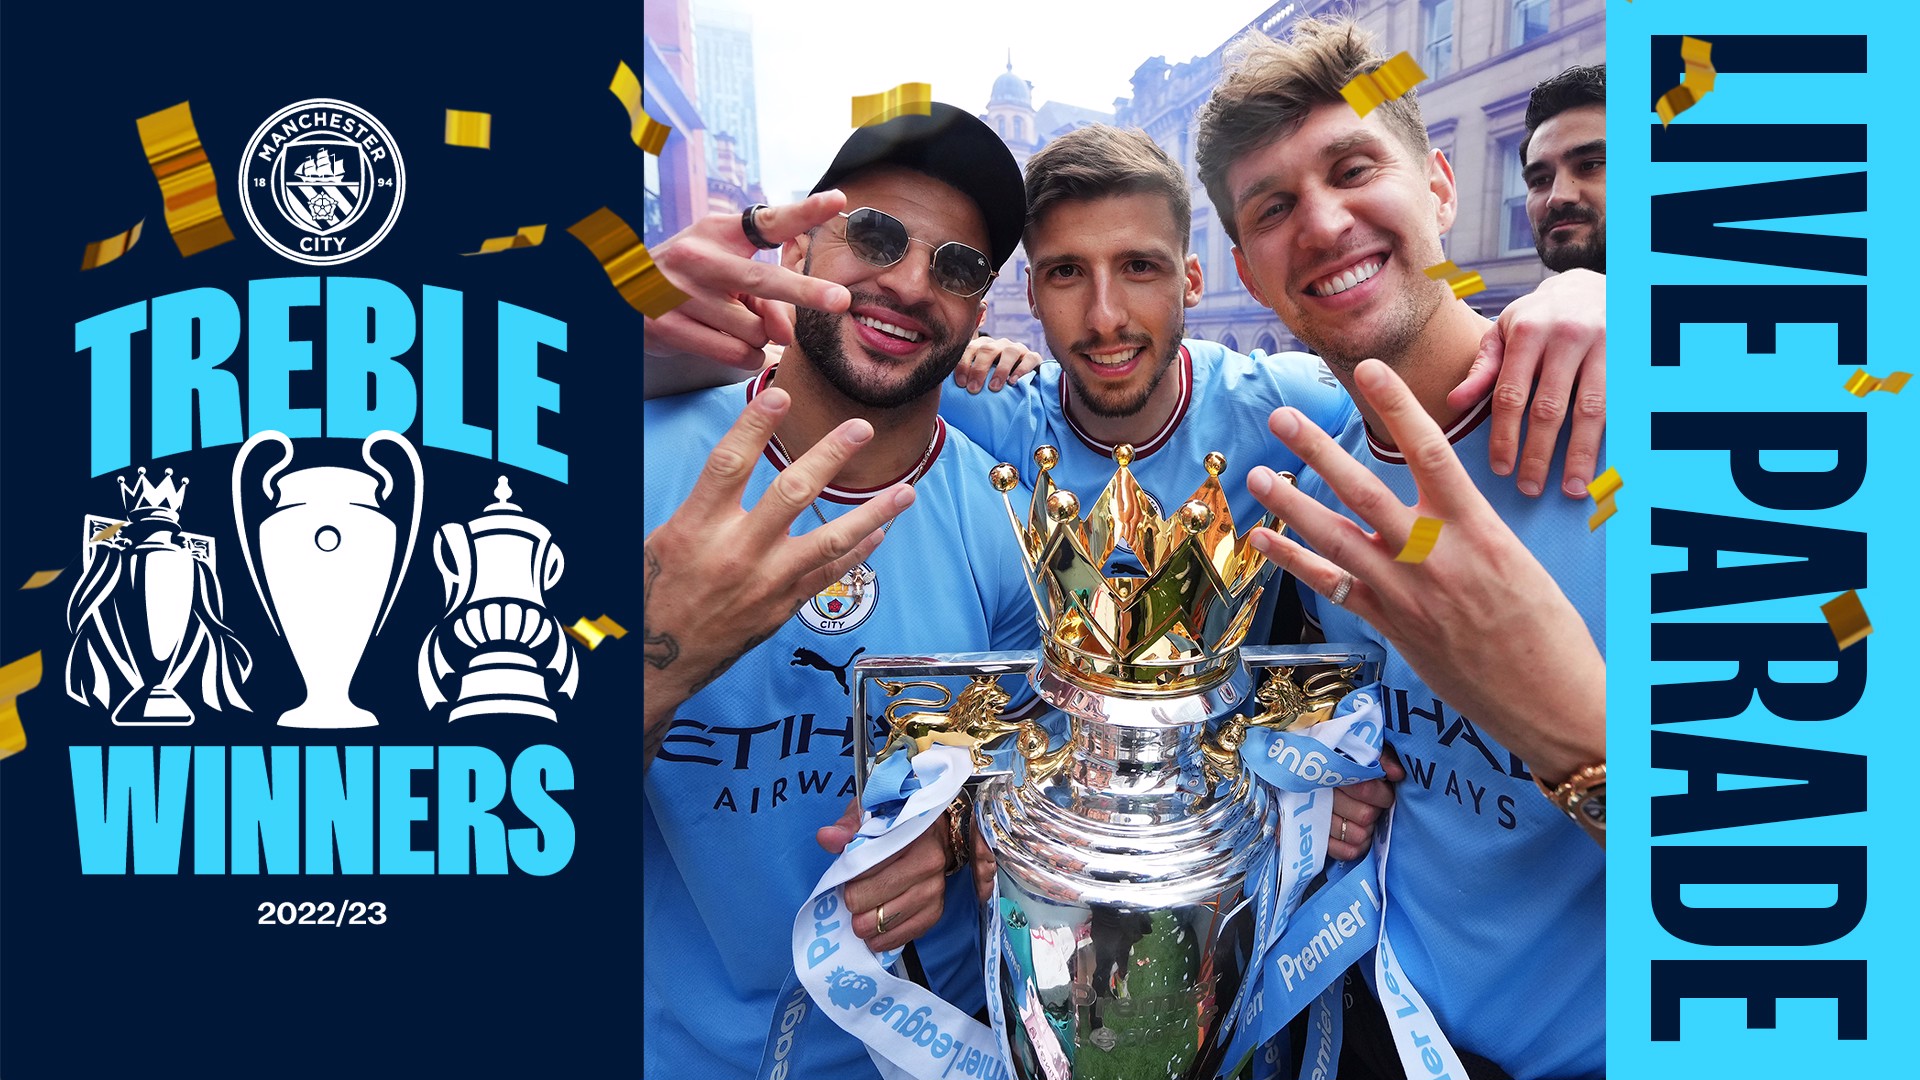 Watch live: Treble winners parade in Manchester